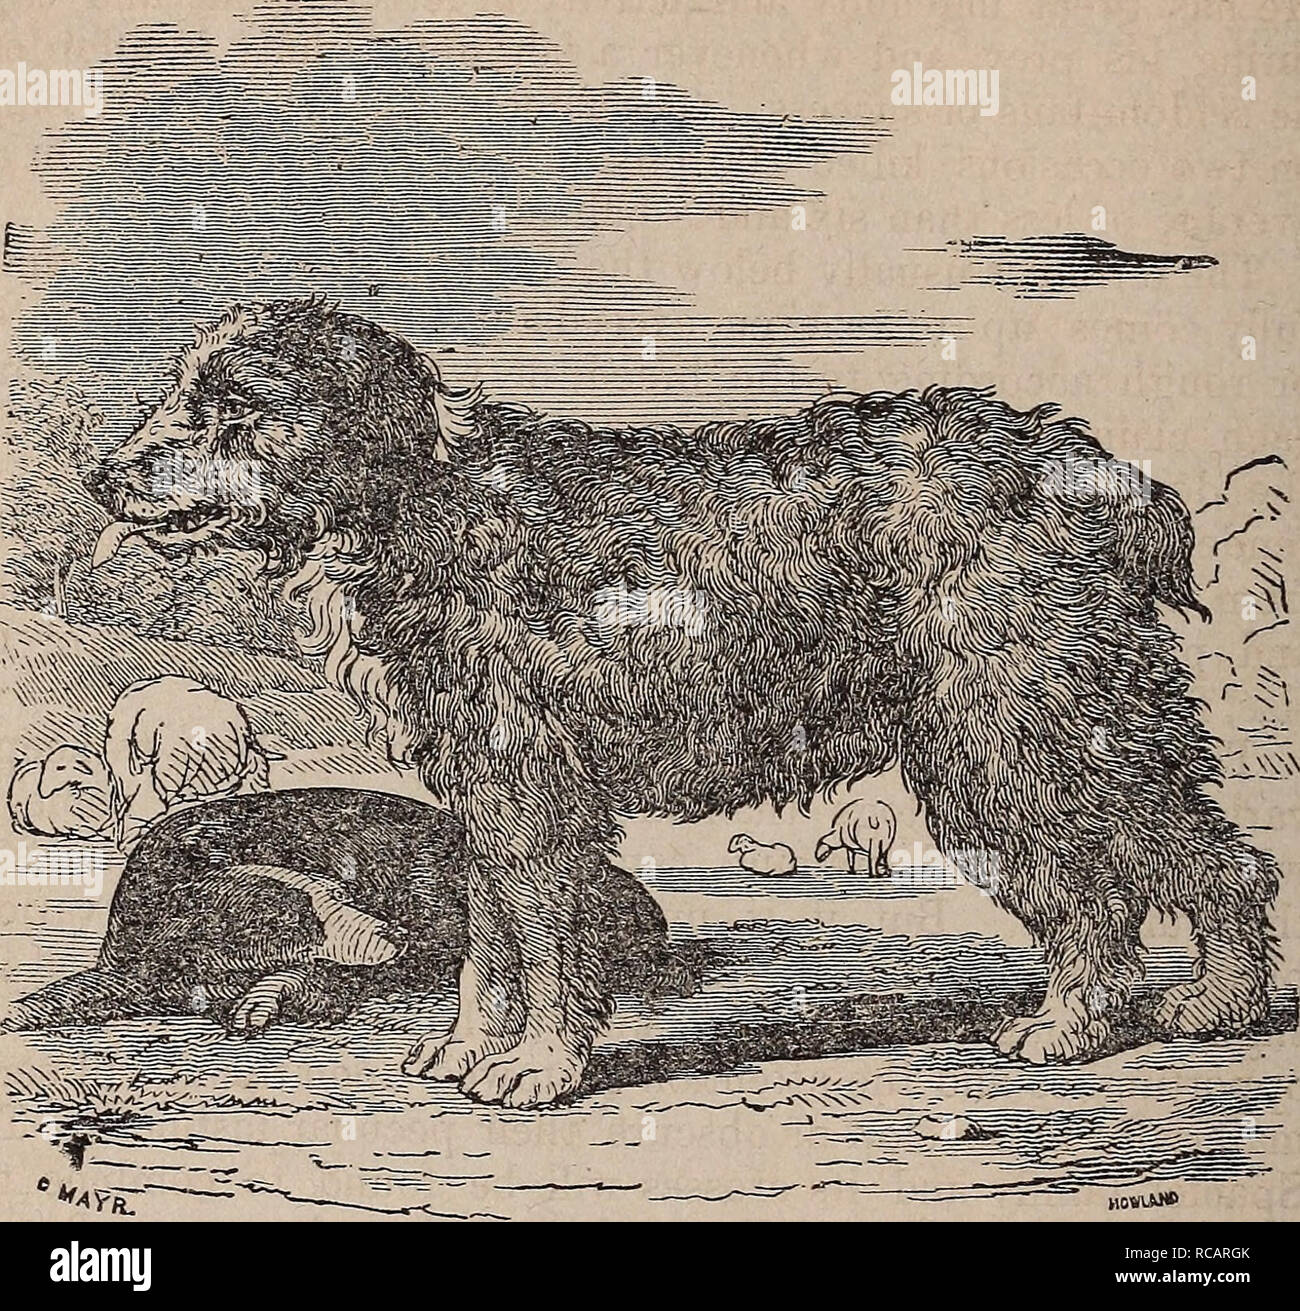 . Domestic animals. Domestic animals. 212 DOMESTIC ANTMALd. Fig. 39.. Drover s Dog. ten ier have sometimes been resorted to for a strain of that in- domitable courage and game, which is frequently requisite to the proper discharge of his duties. He requires more training than the sheep-dog, as his peculiar instincts are rather to the management of the flock than the herd; but when fairly bro- ken in, he is equally expert in its management. The drover's dog may also be useful for watching, if crossed with a refer- ence to this object, which the sheep-dog seldom is. The Terrier. This, in additio Stock Photo